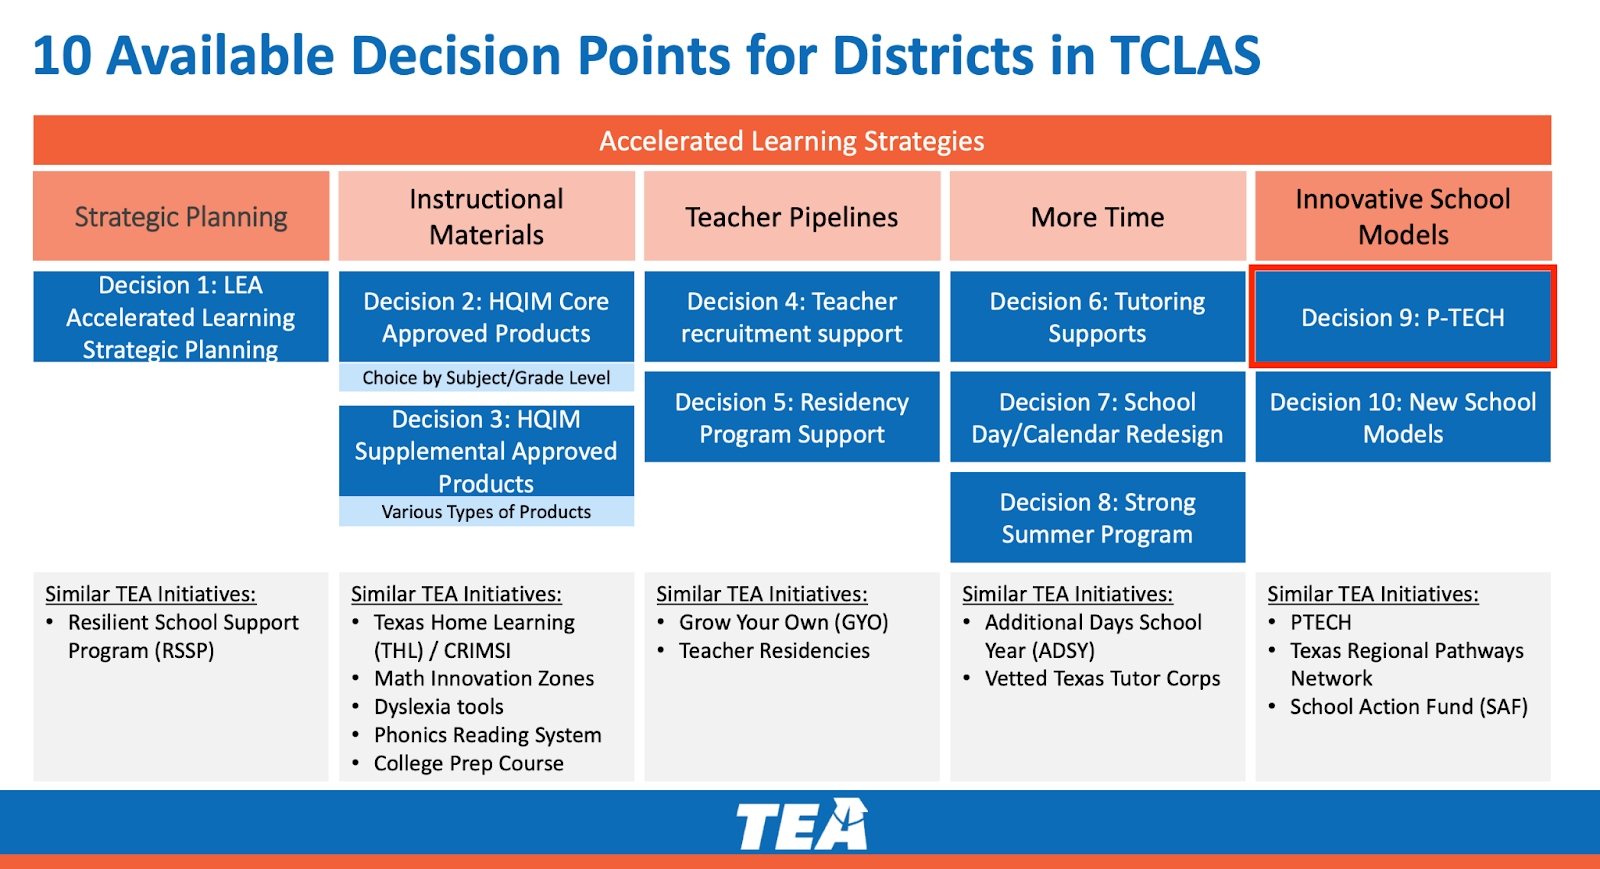 TEA Table of 10 Available Decision Points for Districts in TCLAS